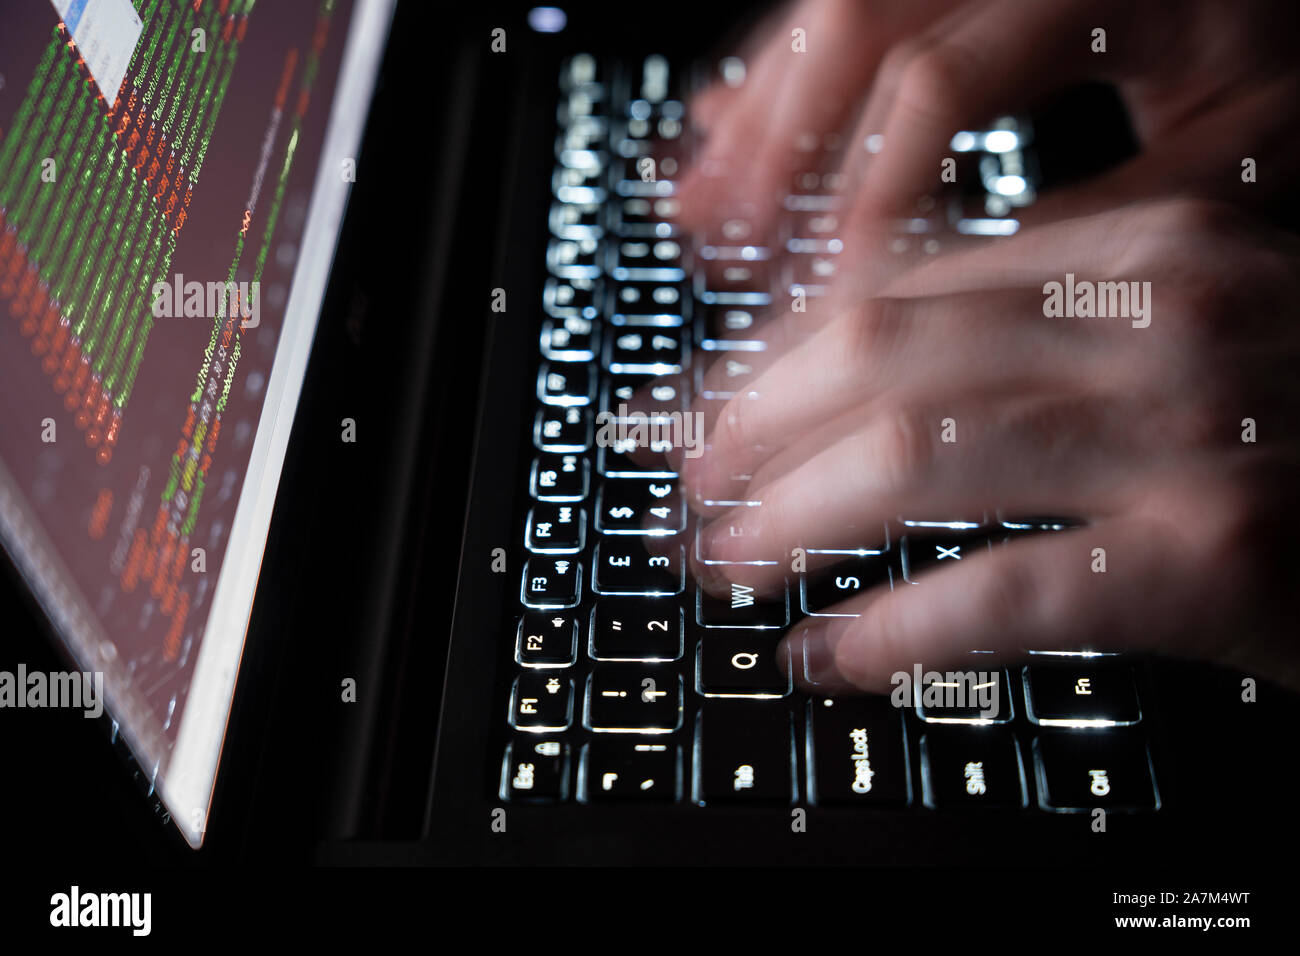 Moving hands typing on a computer keyboard - concept cybersecurity, phishing, hacking, social engineering attack, dark web, viruses and trojans Stock Photo